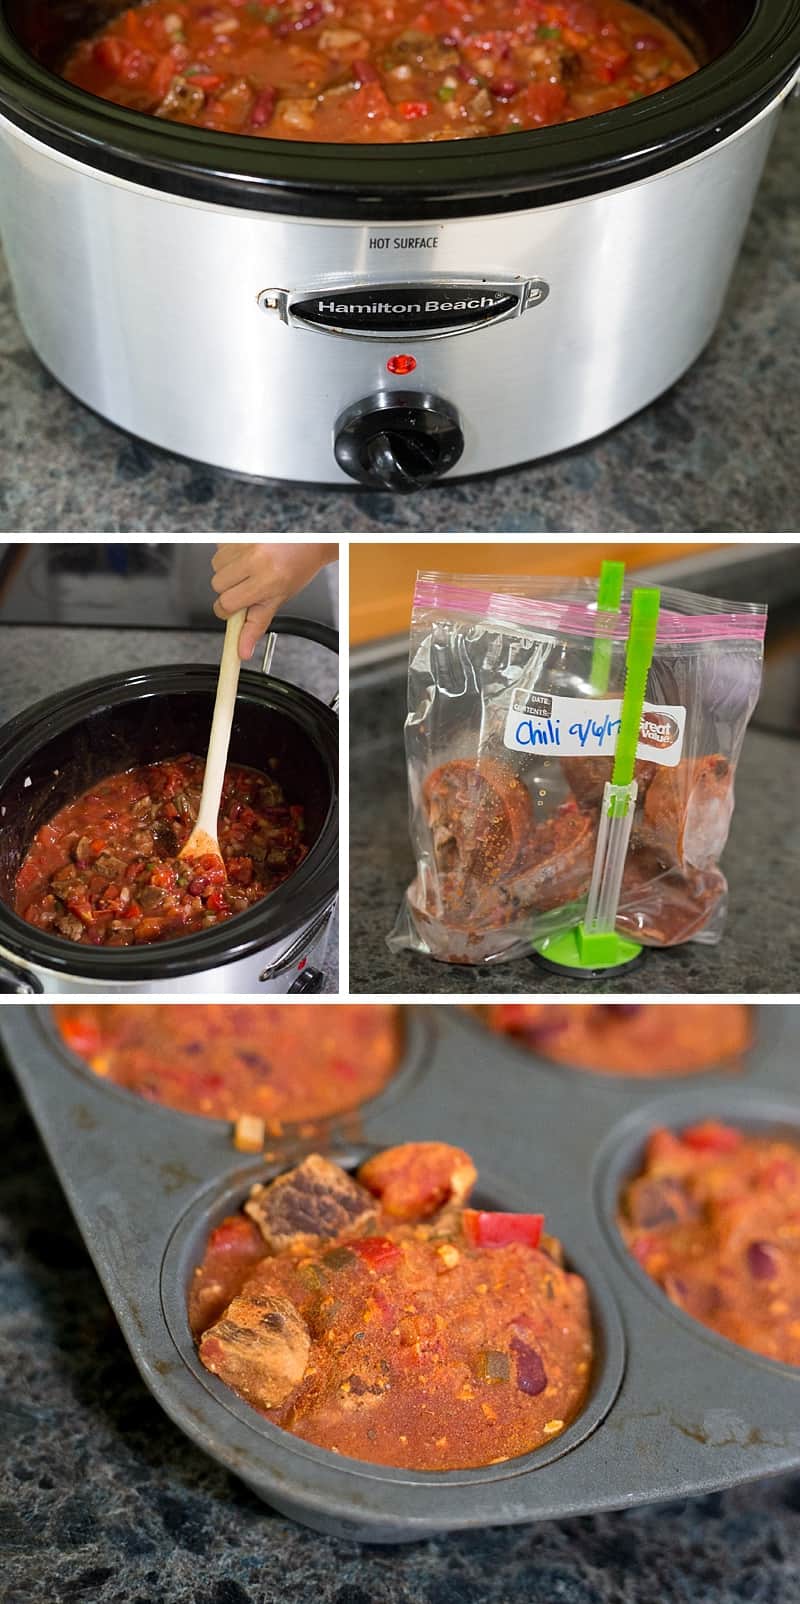 Best chili EVER! This slow cooker recipe is so SIMPLE to make and perfect for FREEZING into single sized servings. You can use ground beef, steak or go vegetarian. *This is one of my go-to dinners that the whole family loves. Perfect comfort food.